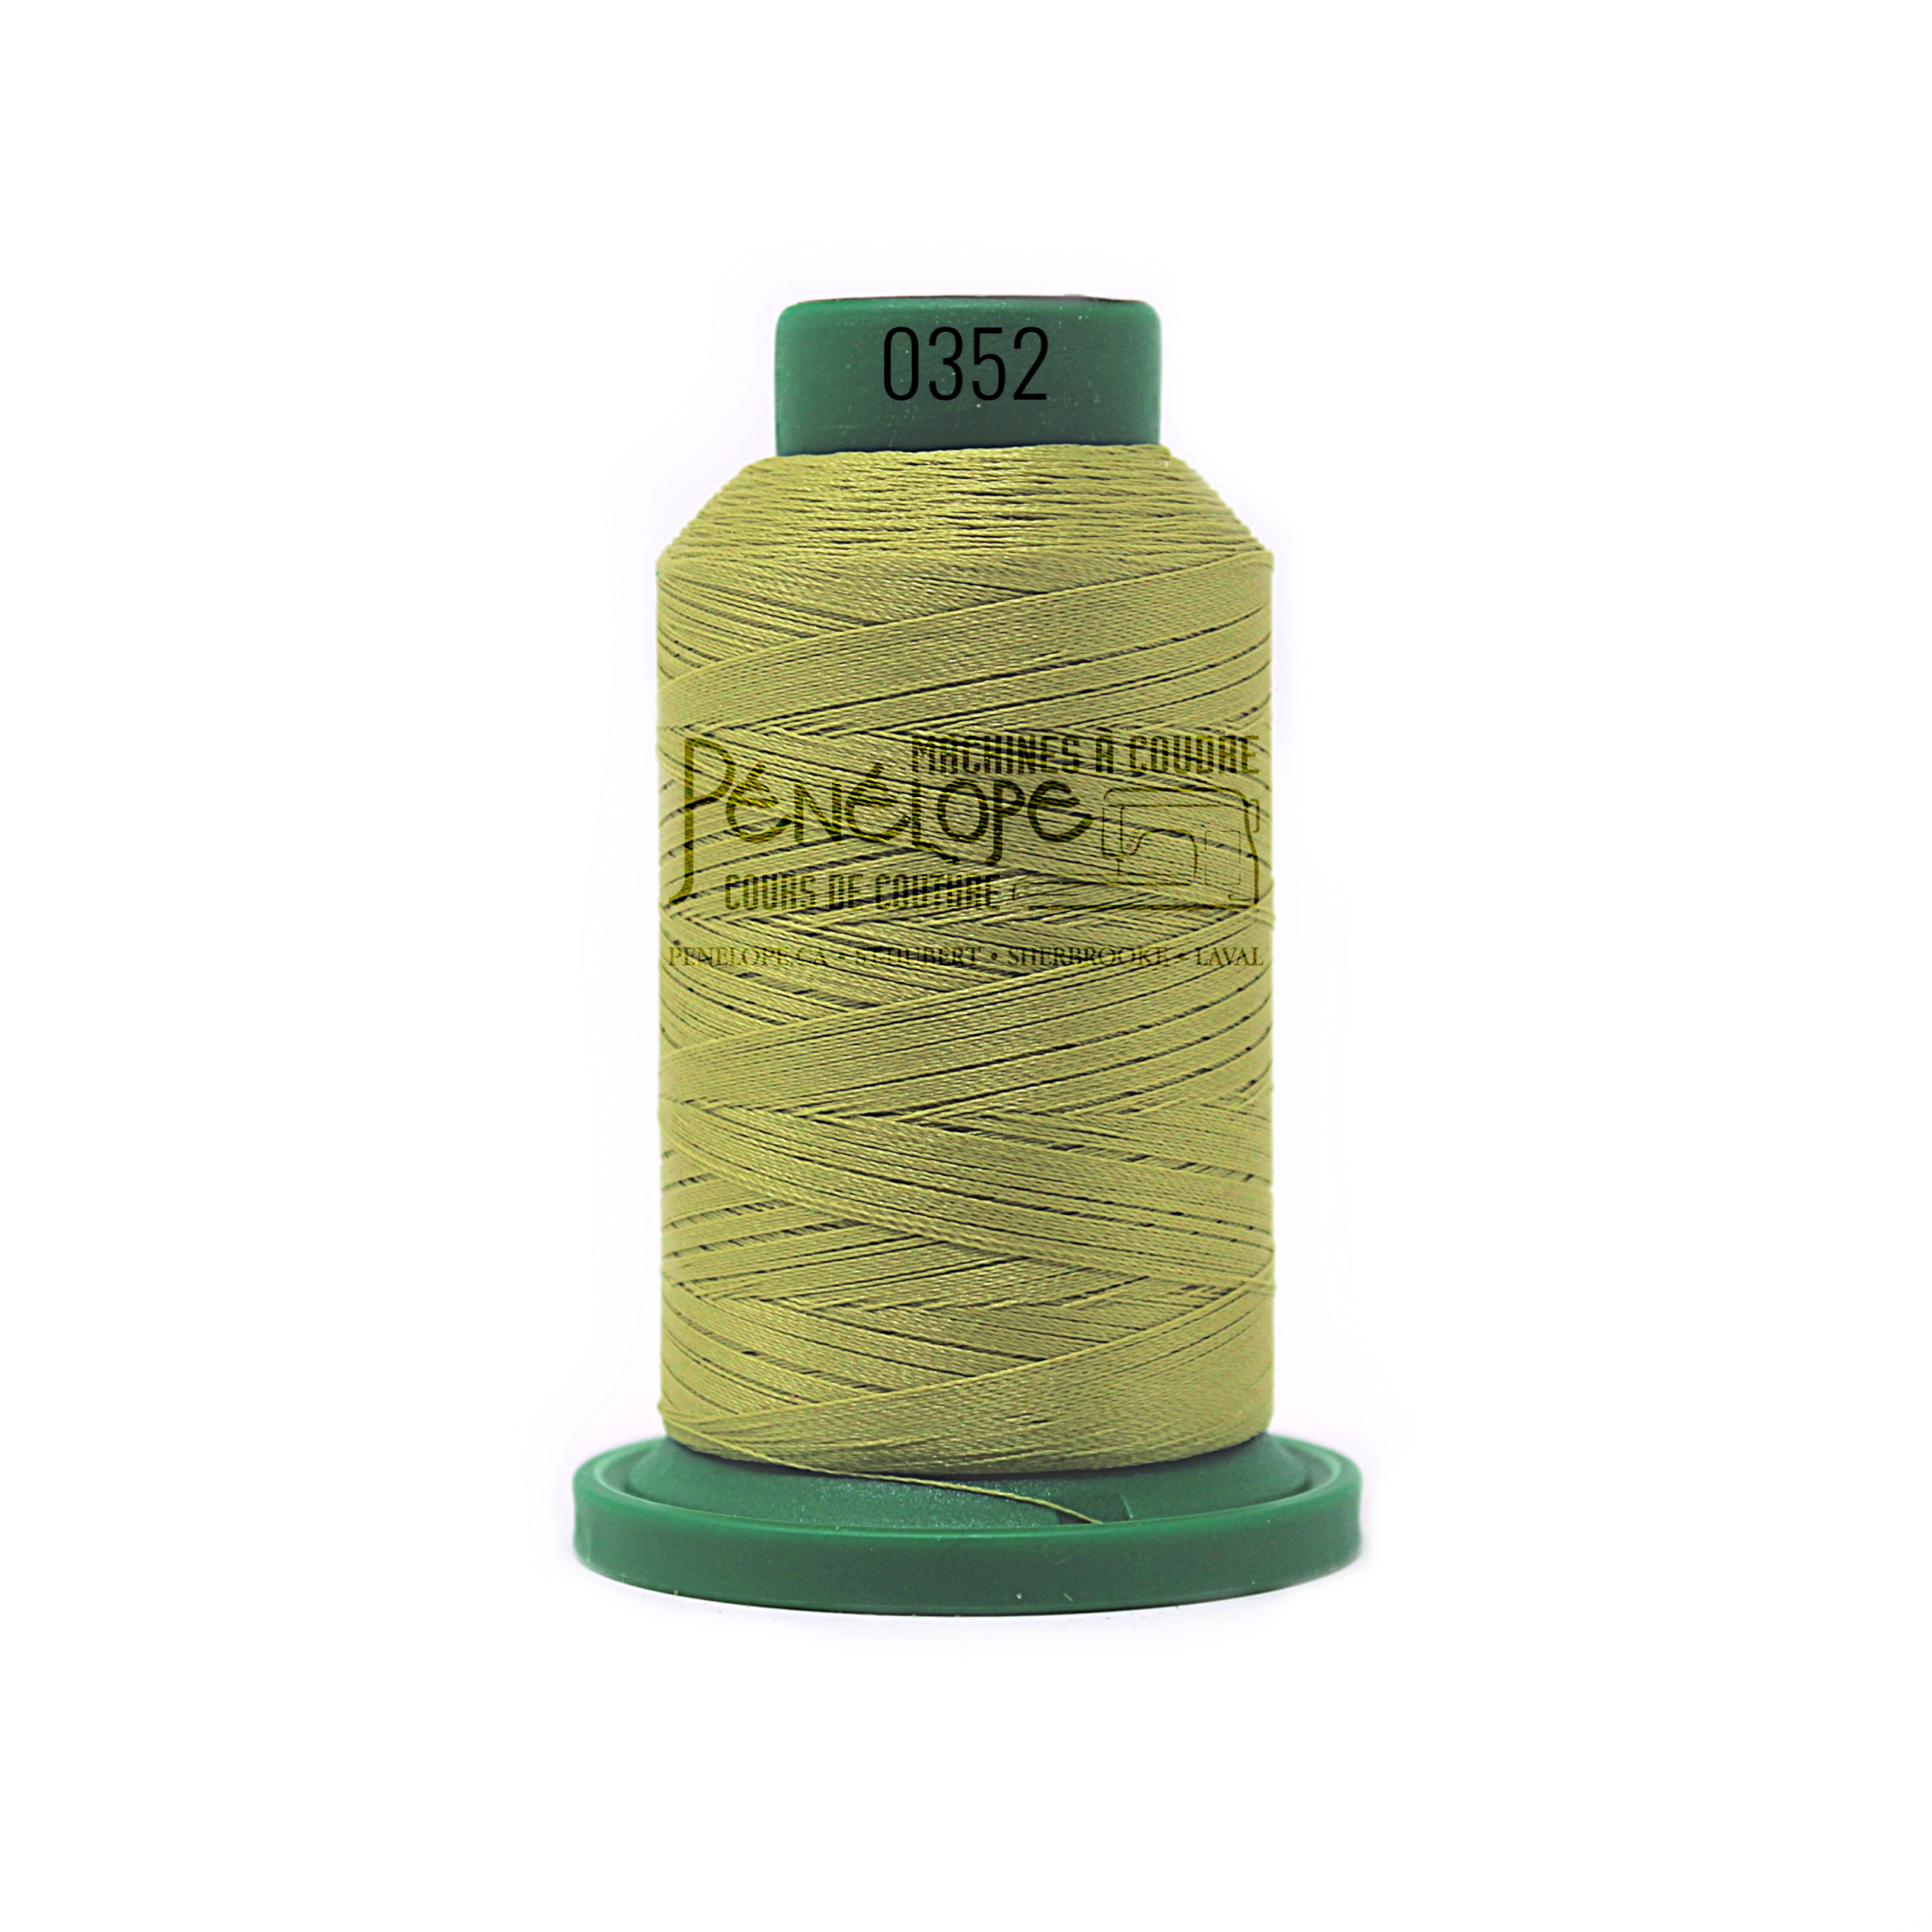 Isacord Isacord sewing and embroidery thread 0352